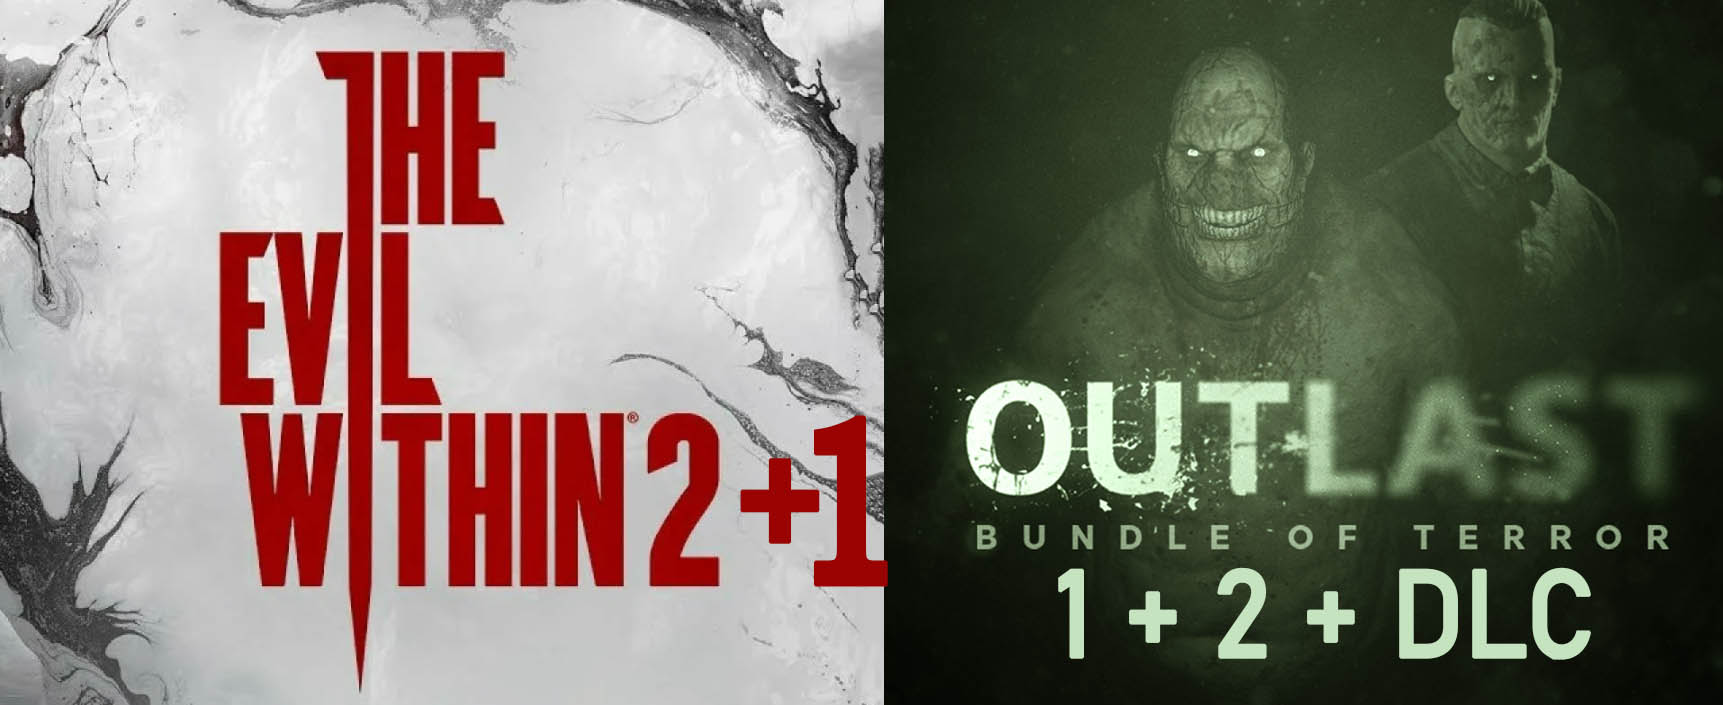 The Evil Within 2+1 + Outlast 1+2 + DLC (STEAM) Account